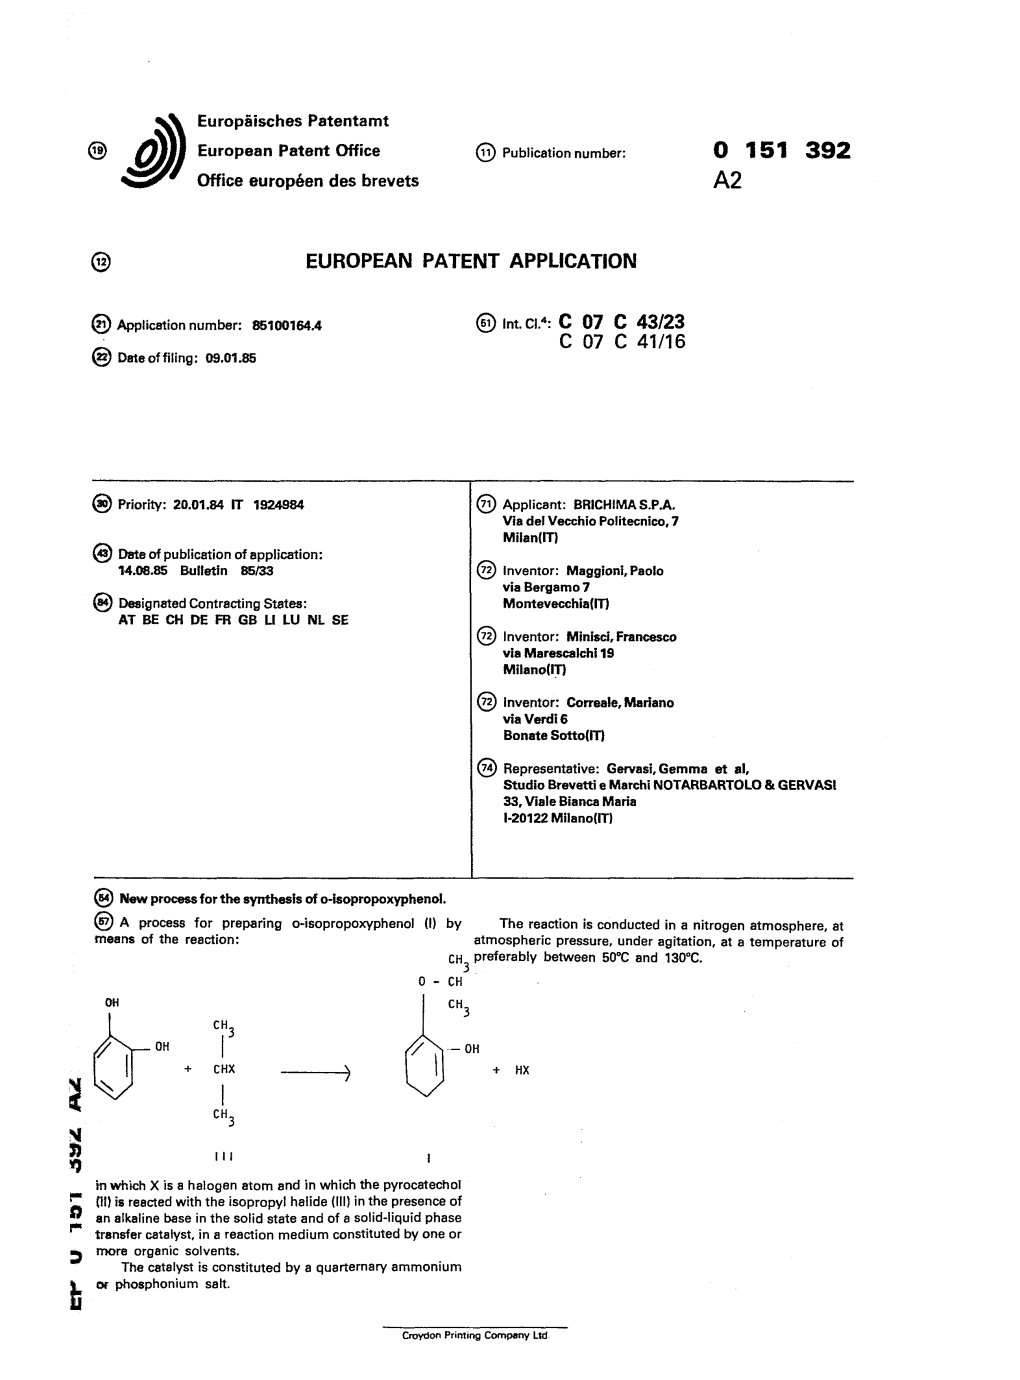 New Process for the Synthesis of O-Isopropoxyphenol